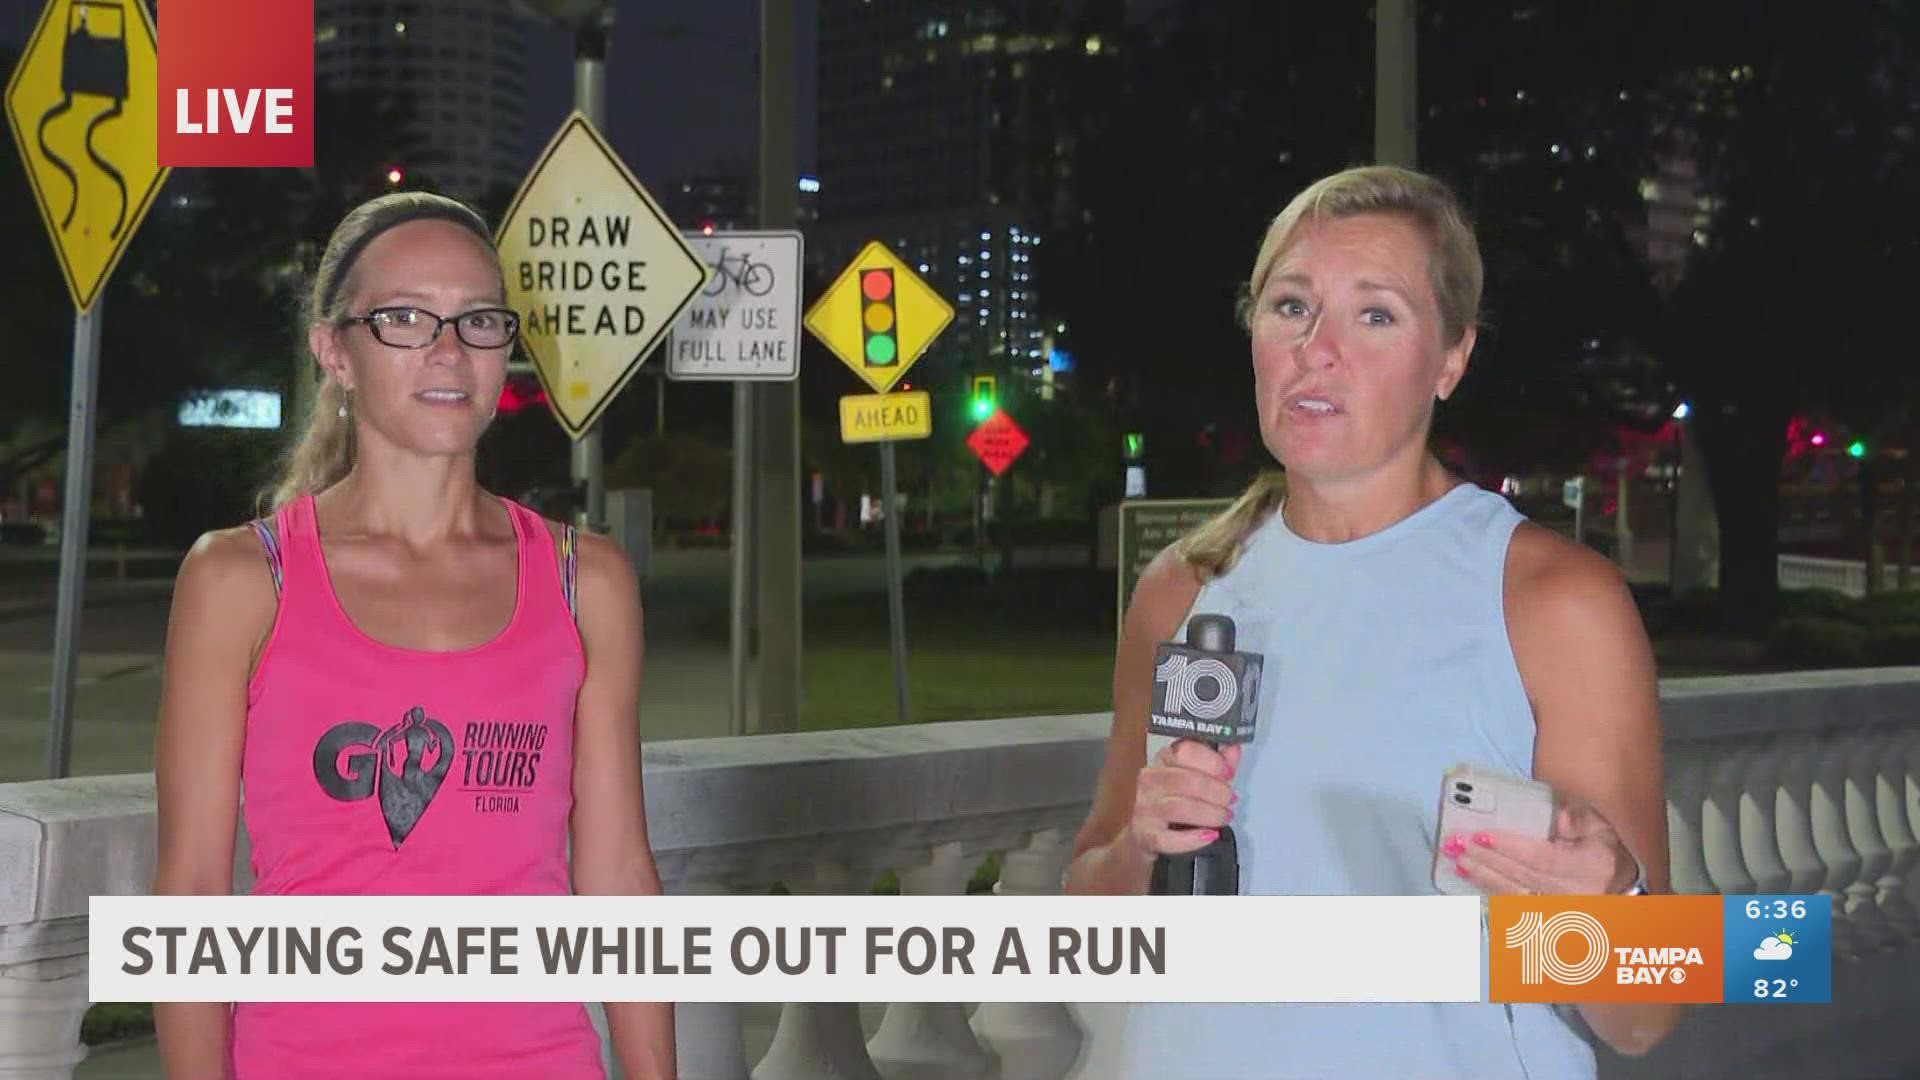 An expert runner shares her best advice, especially in light of the tragic death of a runner who was abducted in Memphis.